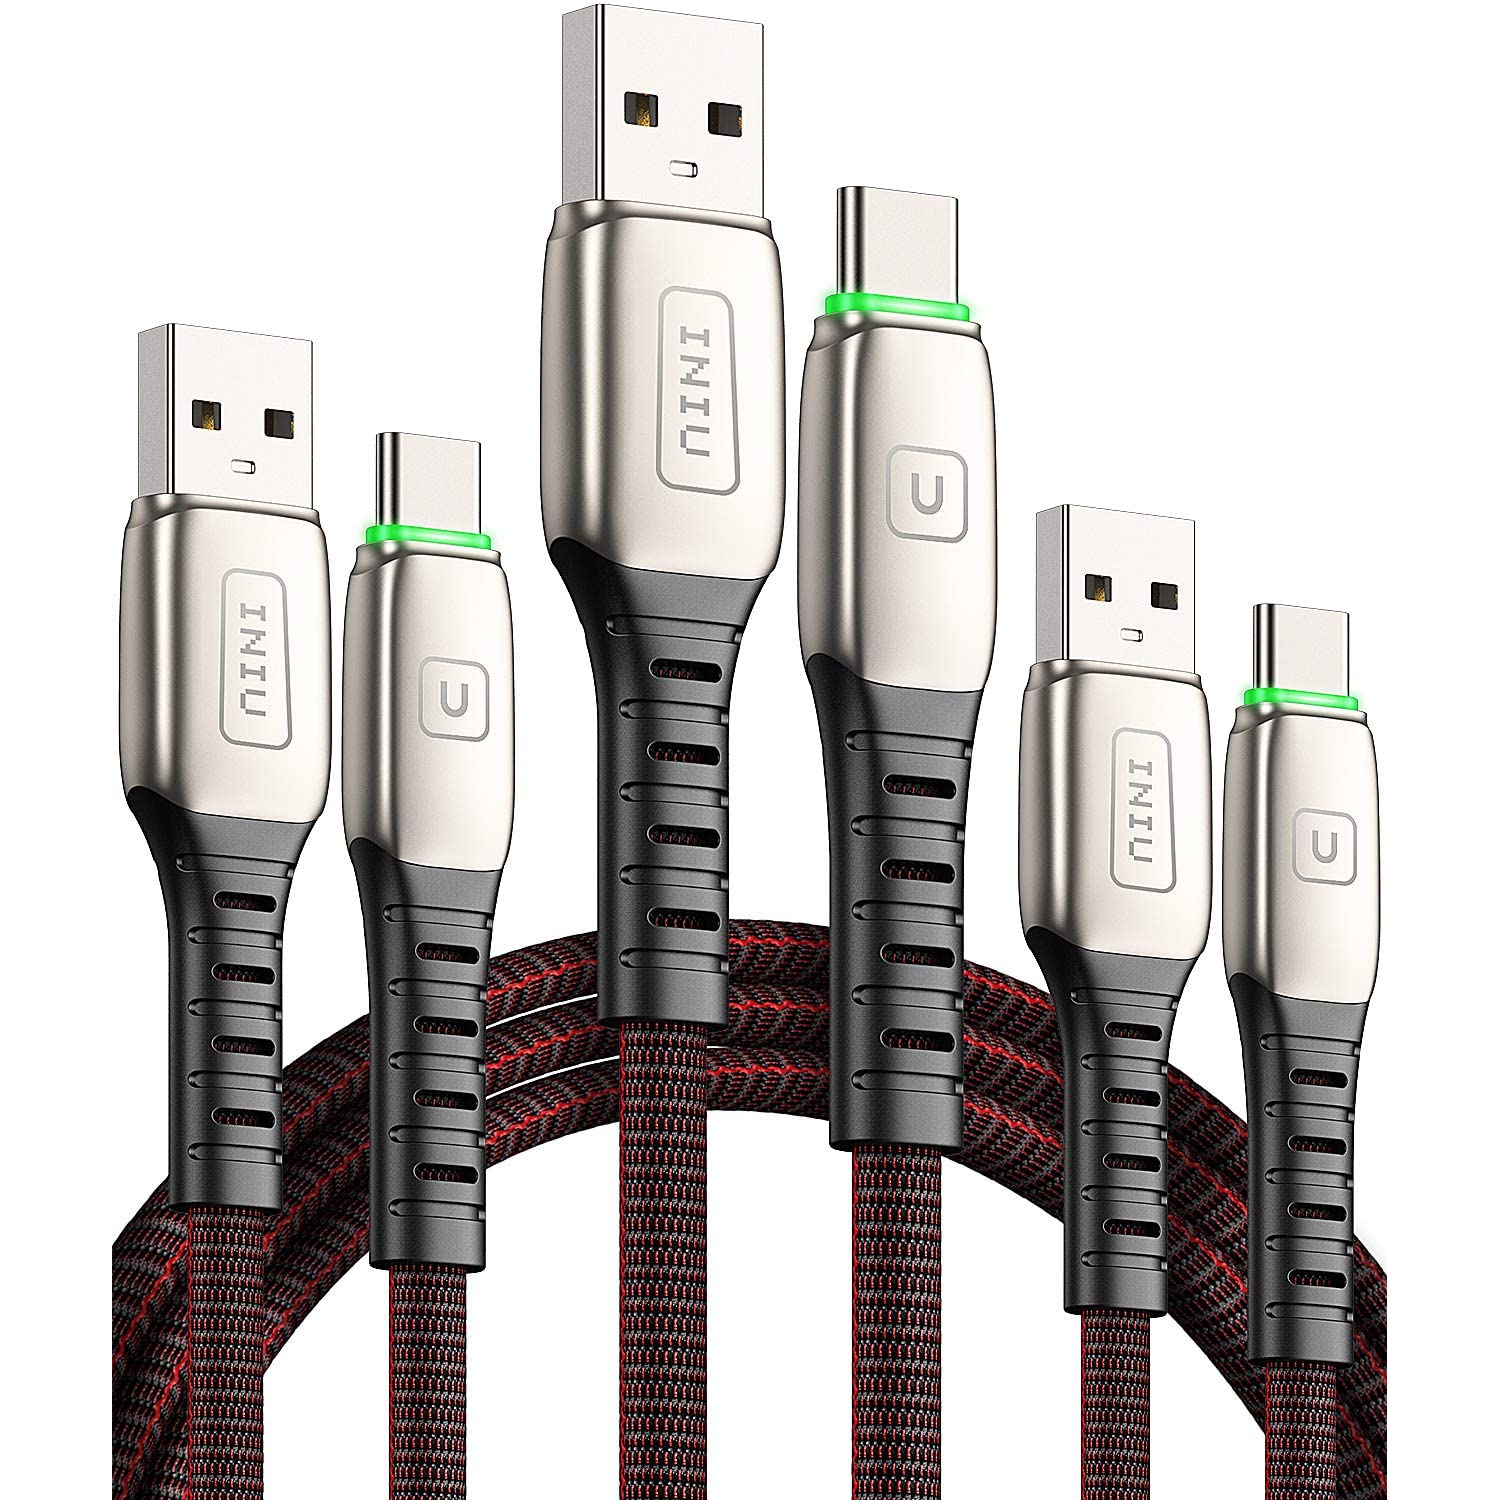 INIU USB C Charge Cable, 【3 Pack】3.1A QC Fast Charging Type C Cable, Ziny Alloy Phone Data USB C Charger Cord with Organizing Strap,(6.6ft+3.3ft+1.6ft) For Samsung Galaxy S20 S10E S10 S9 S8 Plus Note